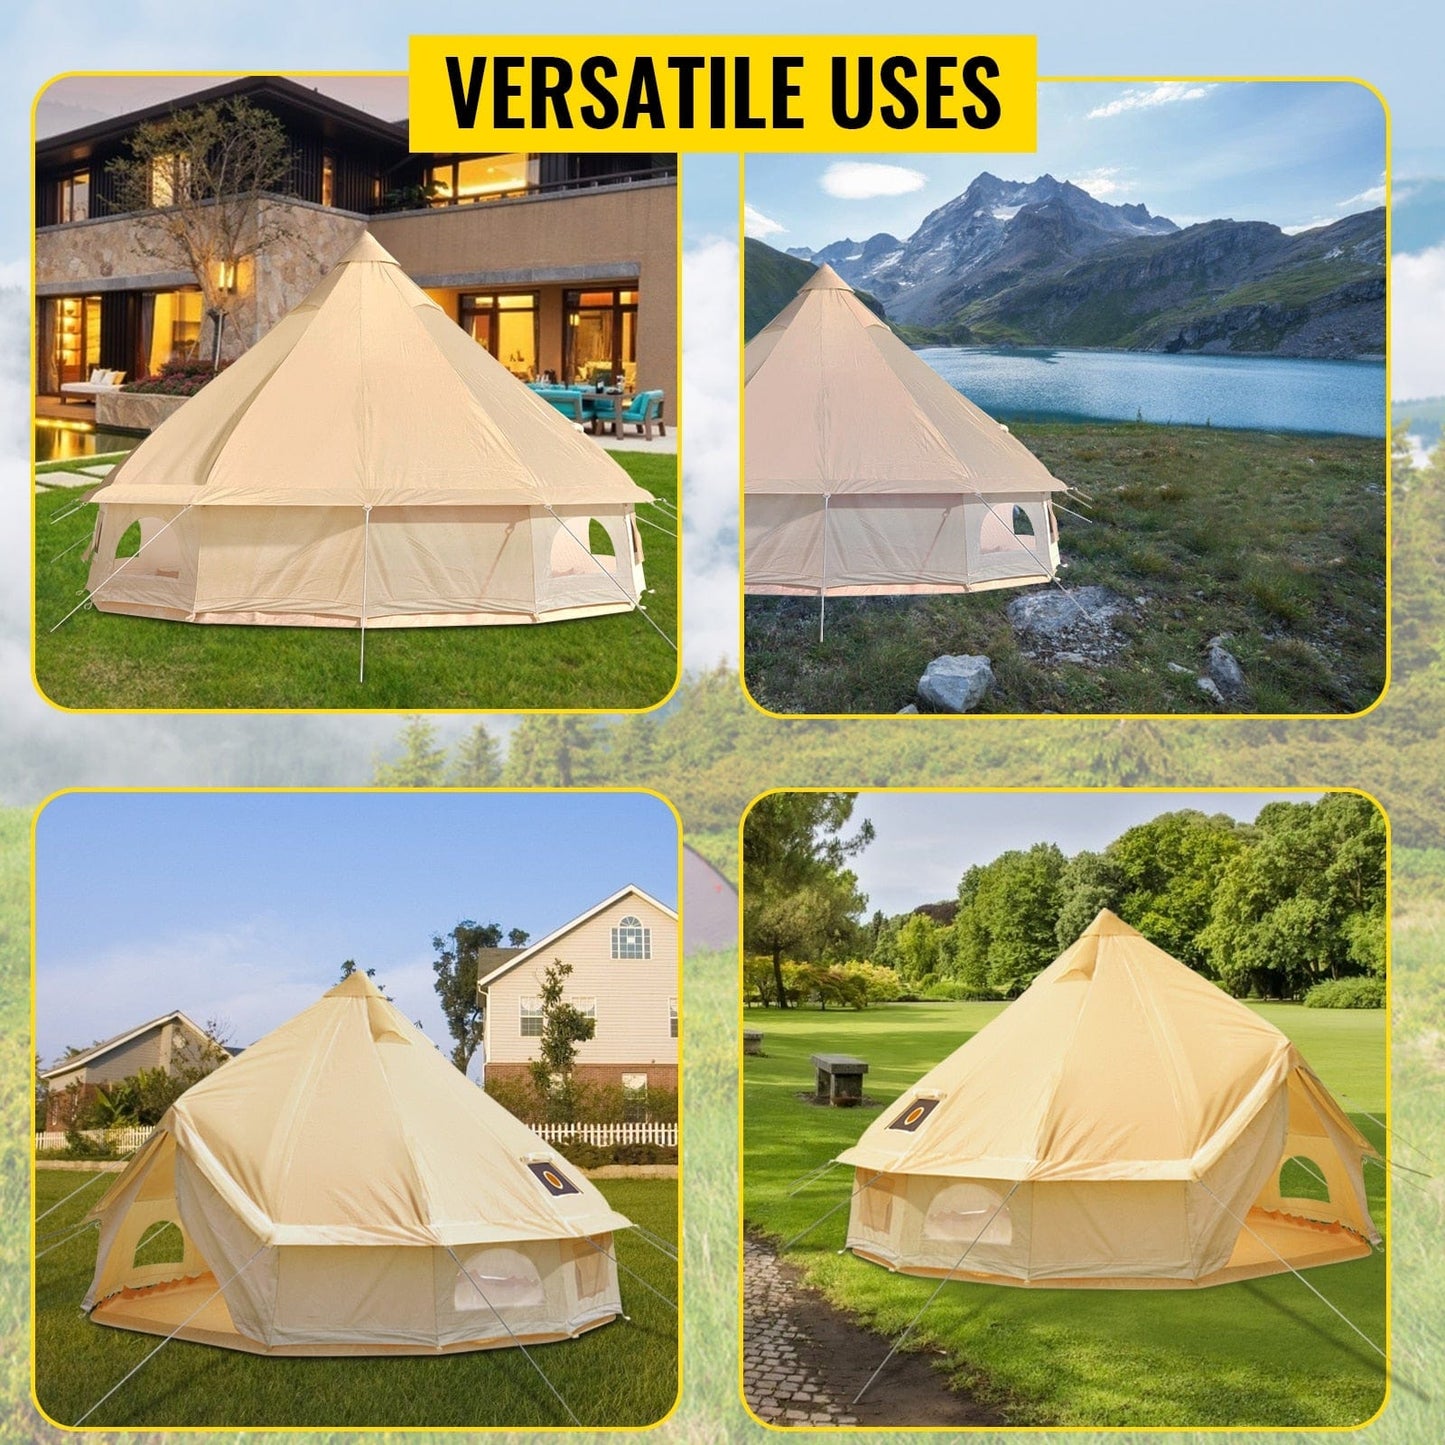 VEVOR Canvas Luxury Bell Tent 3m - 7m  with Stove Jack